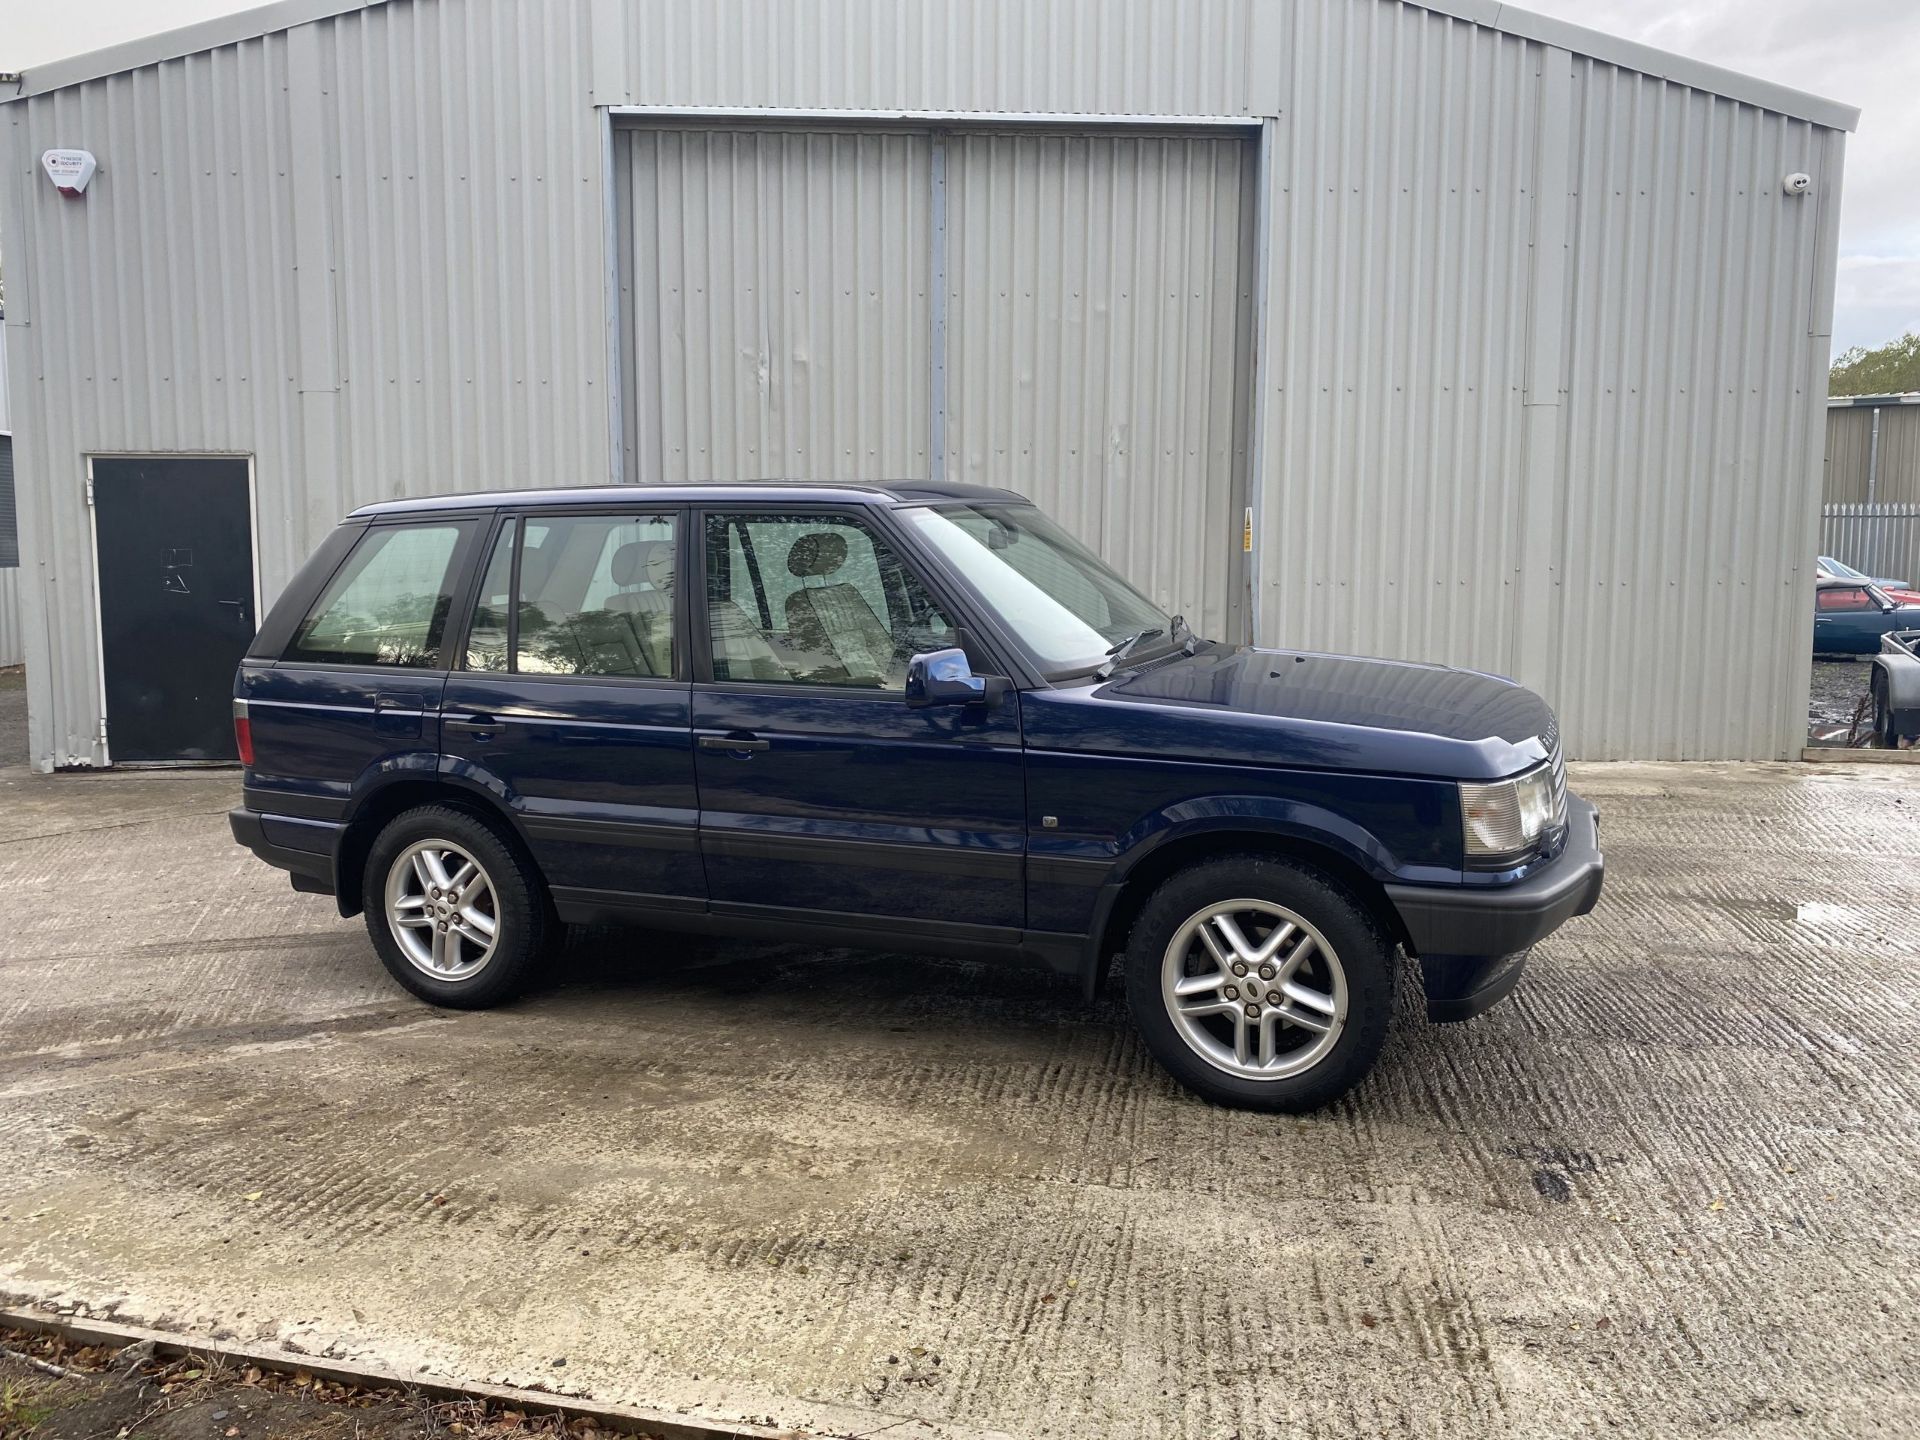 Land Rover Range Rover P38 - Image 4 of 40